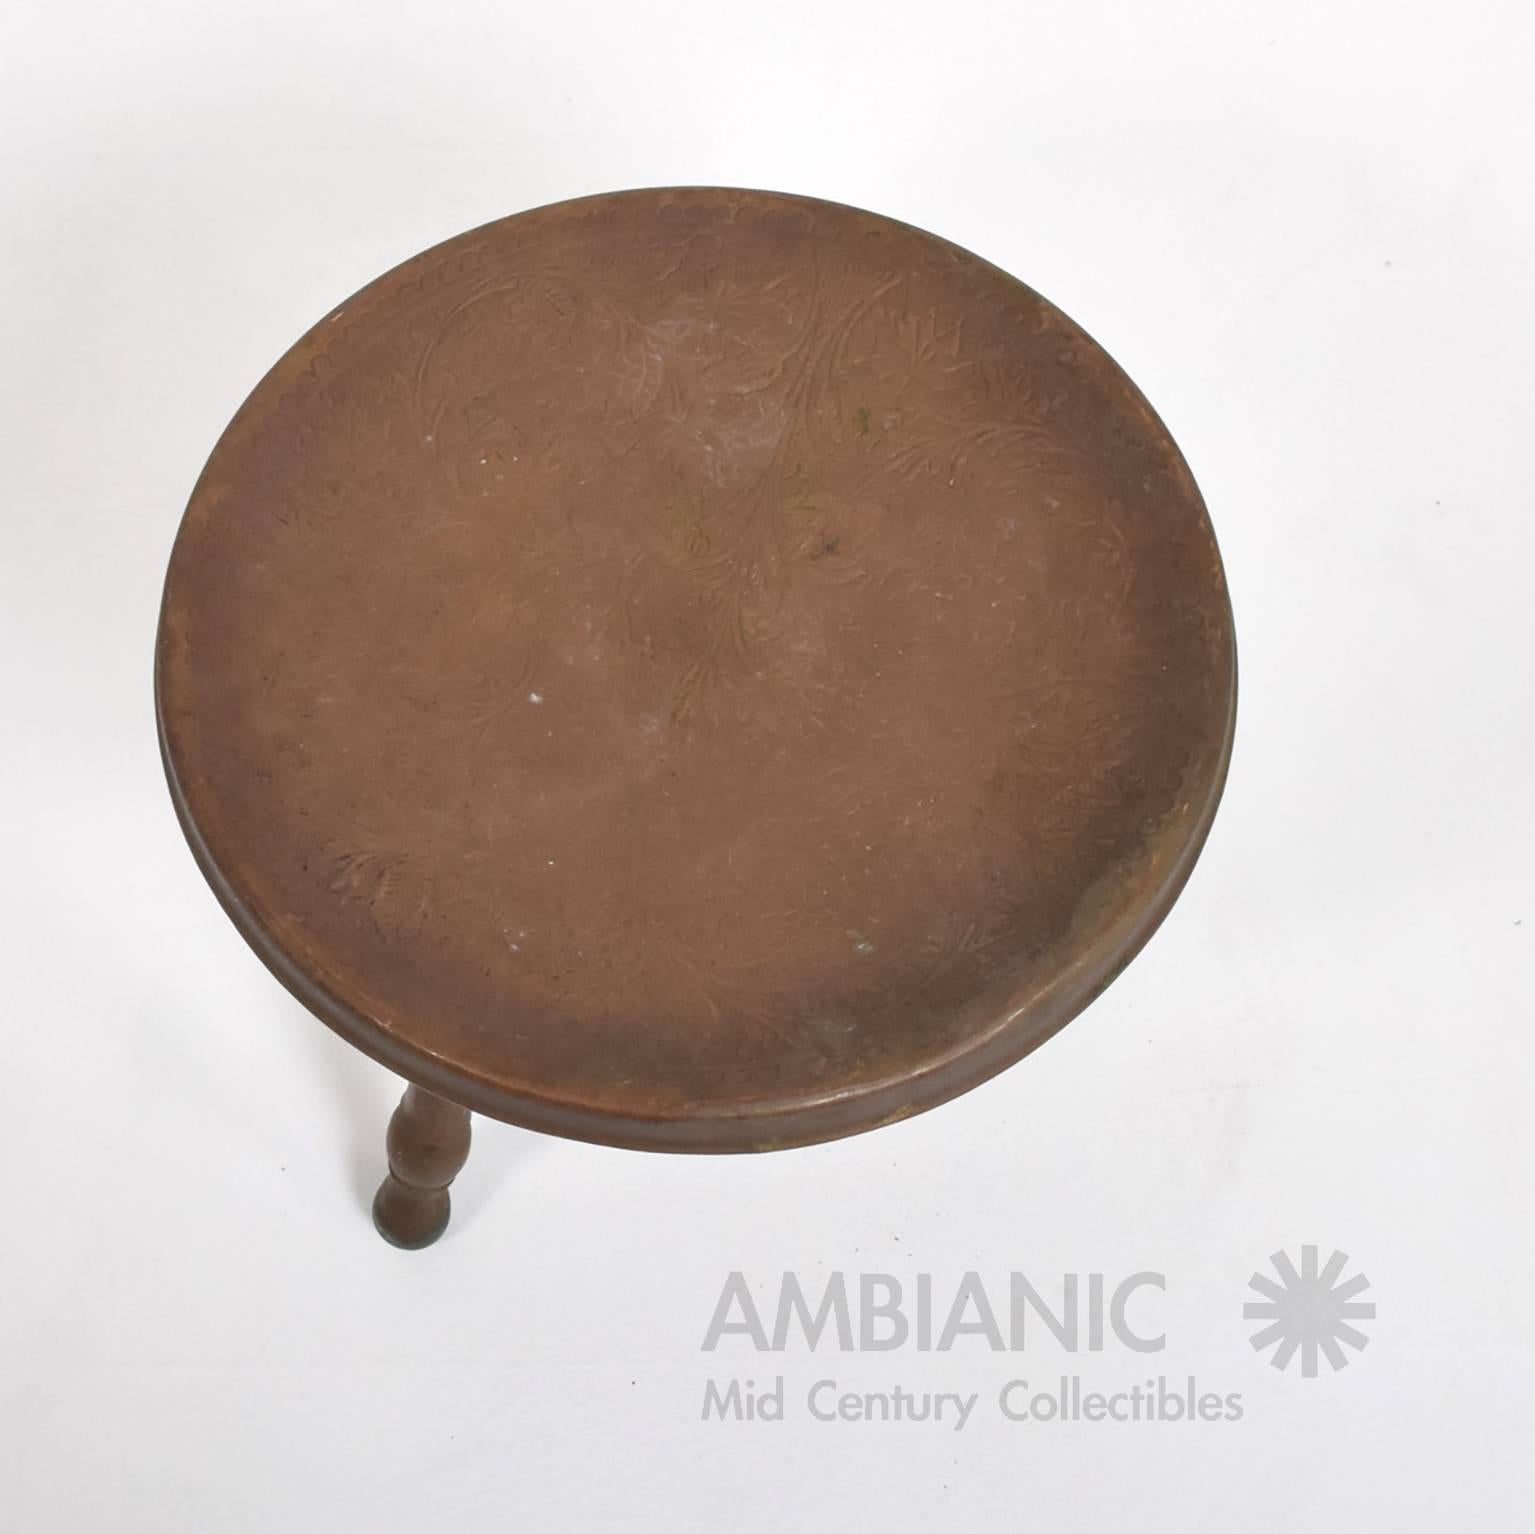 For you consideration a vintage tripod copper alloy stool.
Unmarked, no information on the maker.
Original unrestored condition. Original patina. Lower section of the legs have verdigris patina.
Legs can be removed for safe and easy